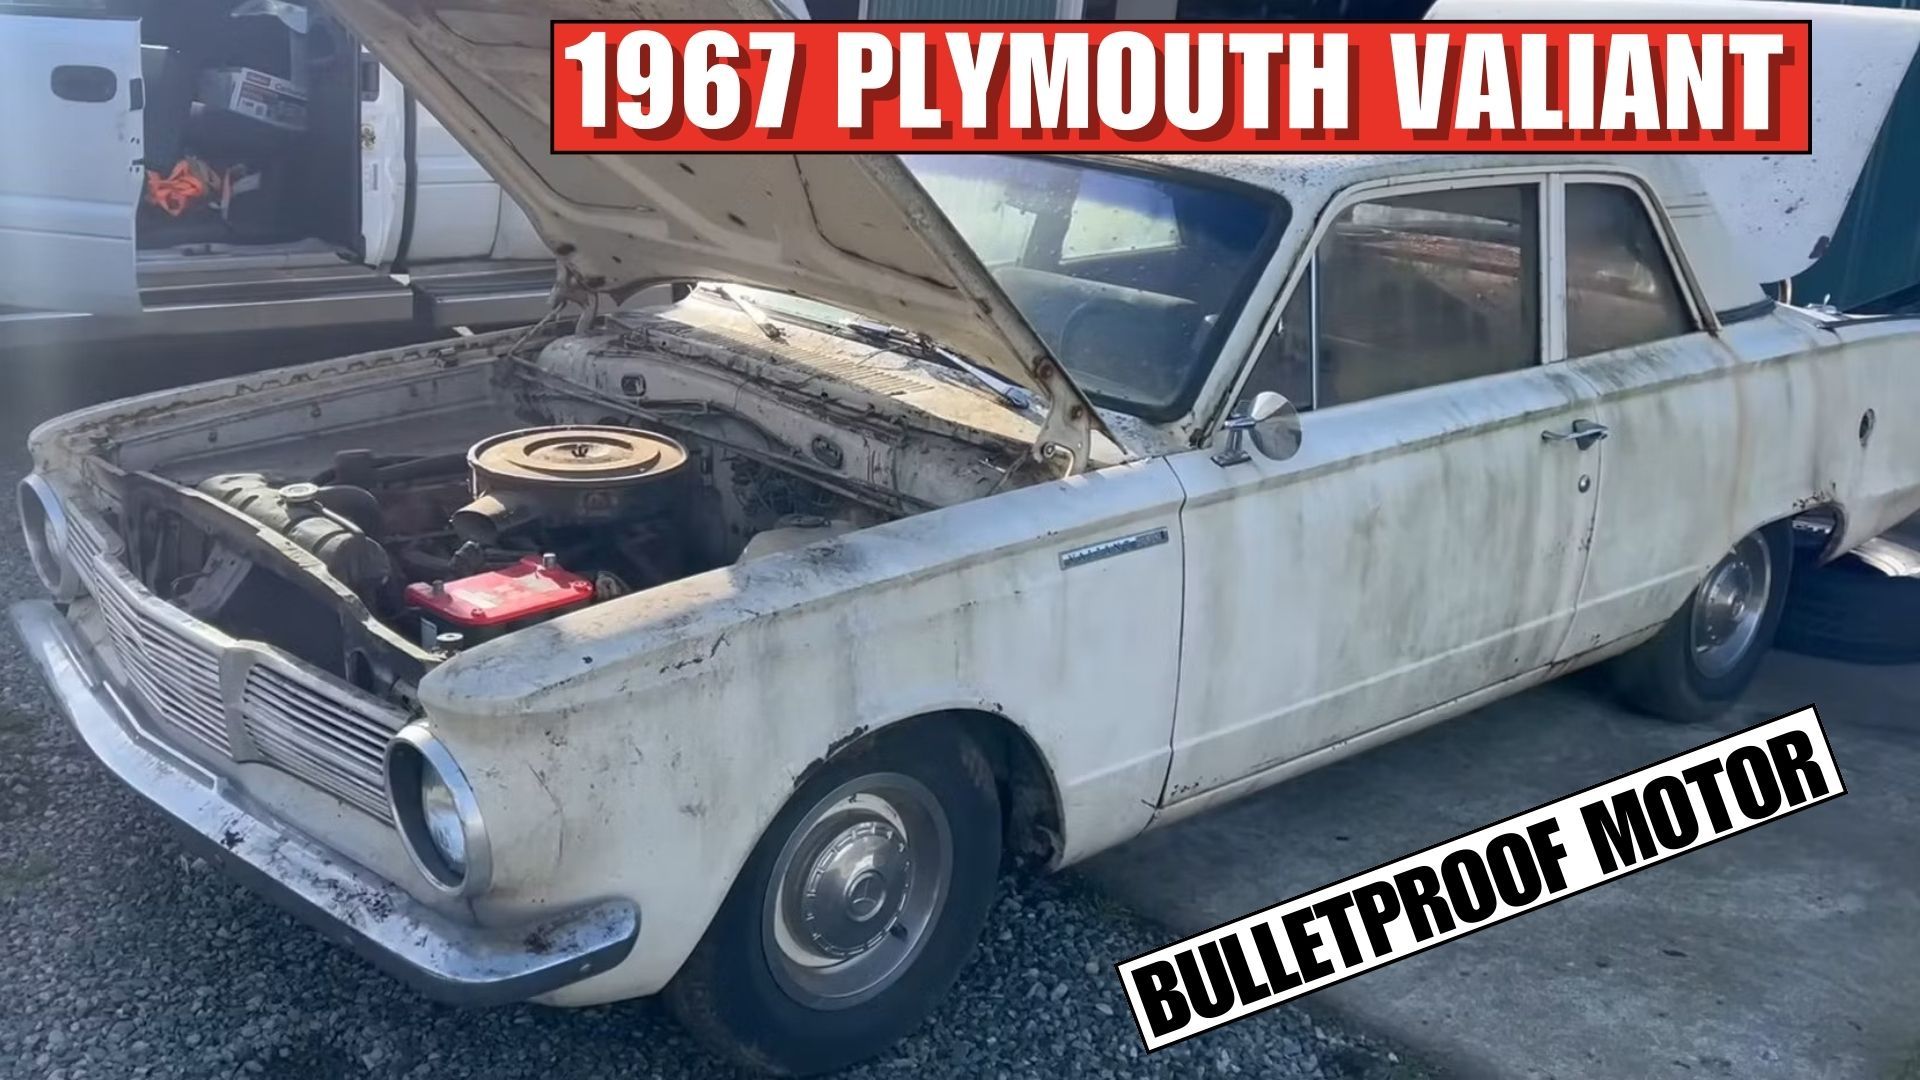 A white 1965 Plymouth Valiant 100 front quarter shot